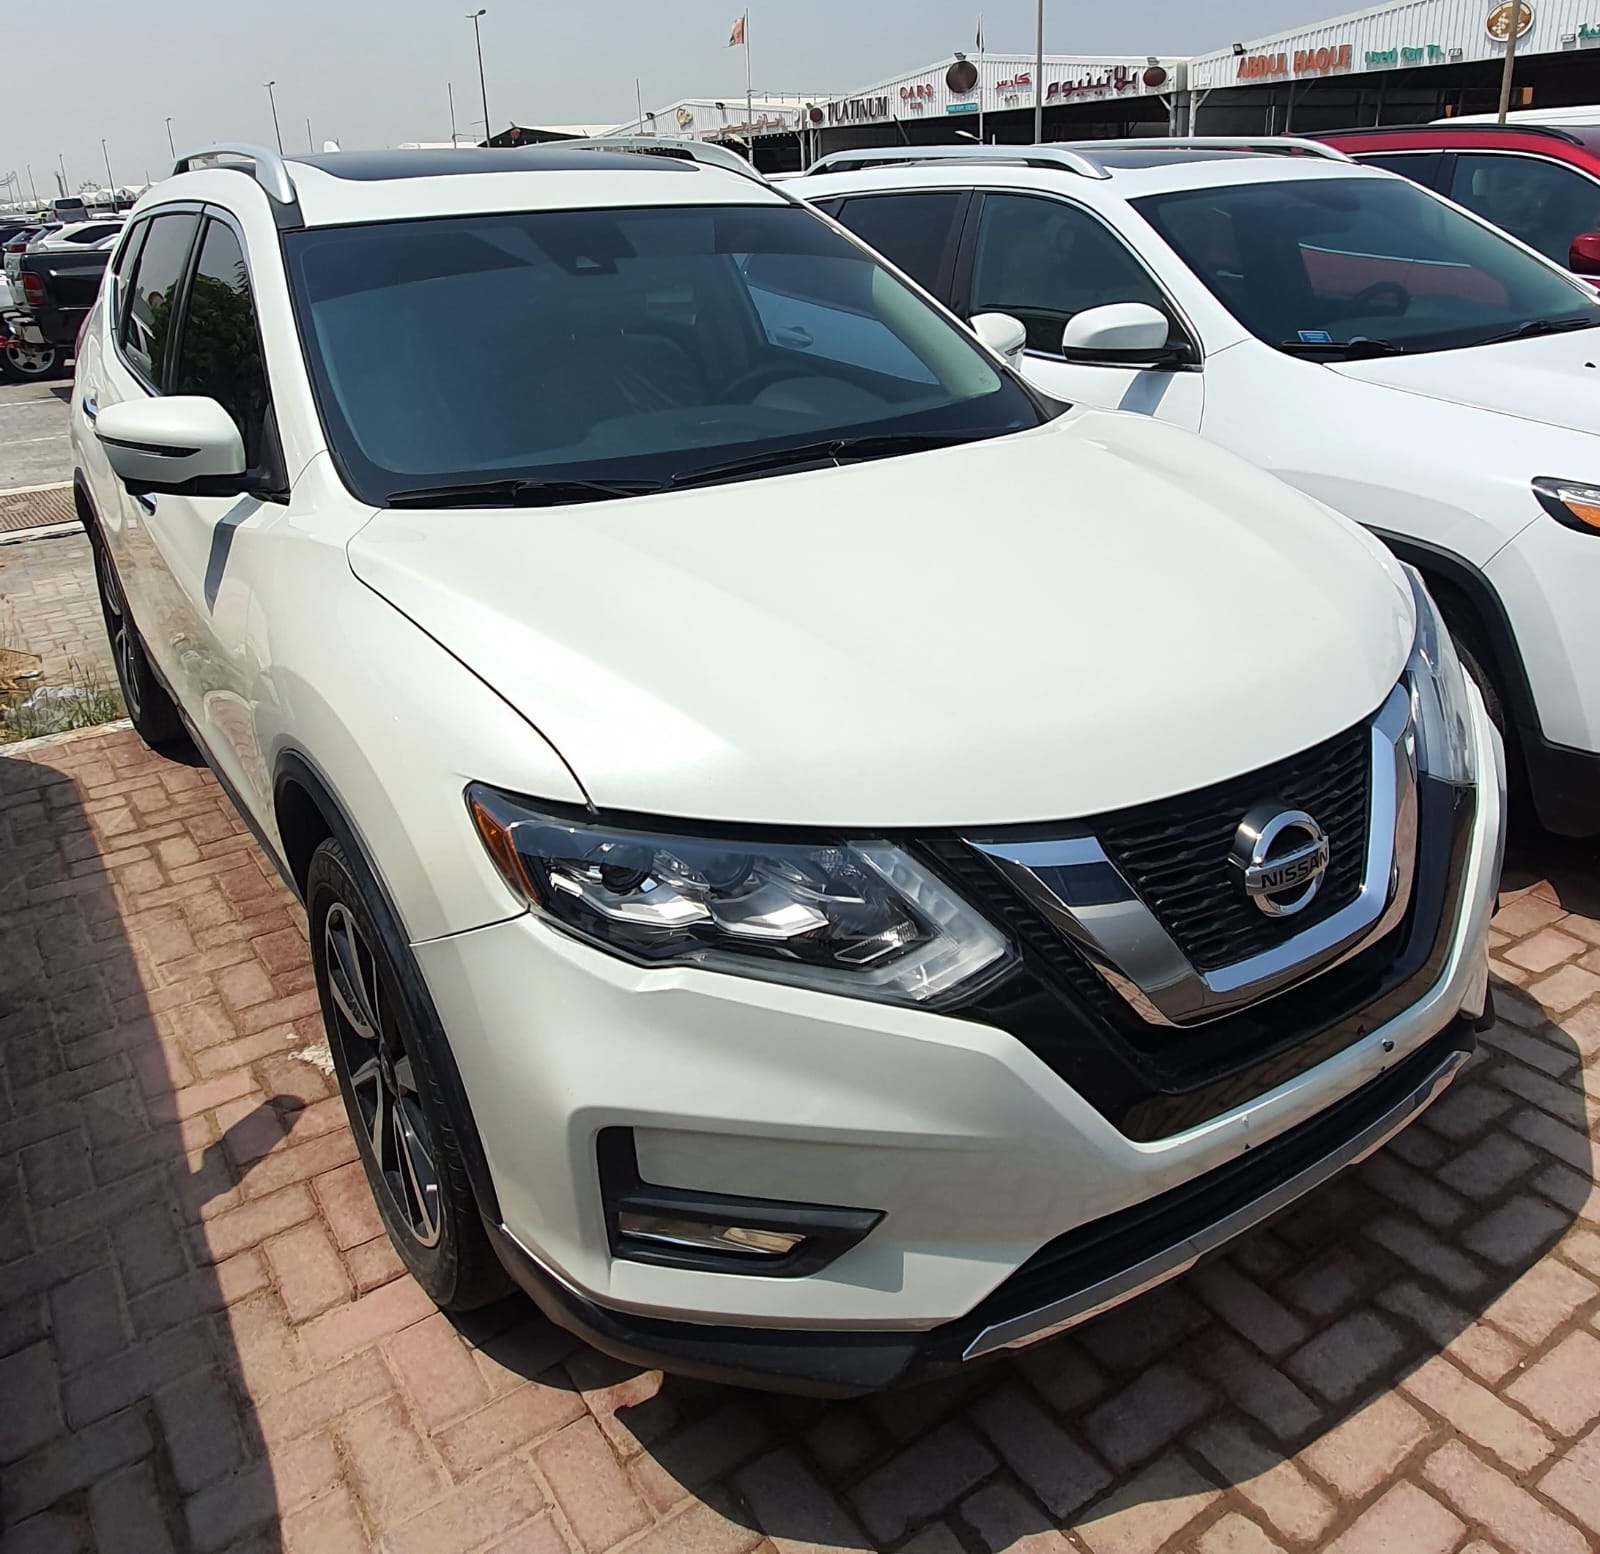 For Sale NISSAN ROGUE SL Panorama 2019 2.5 L V4